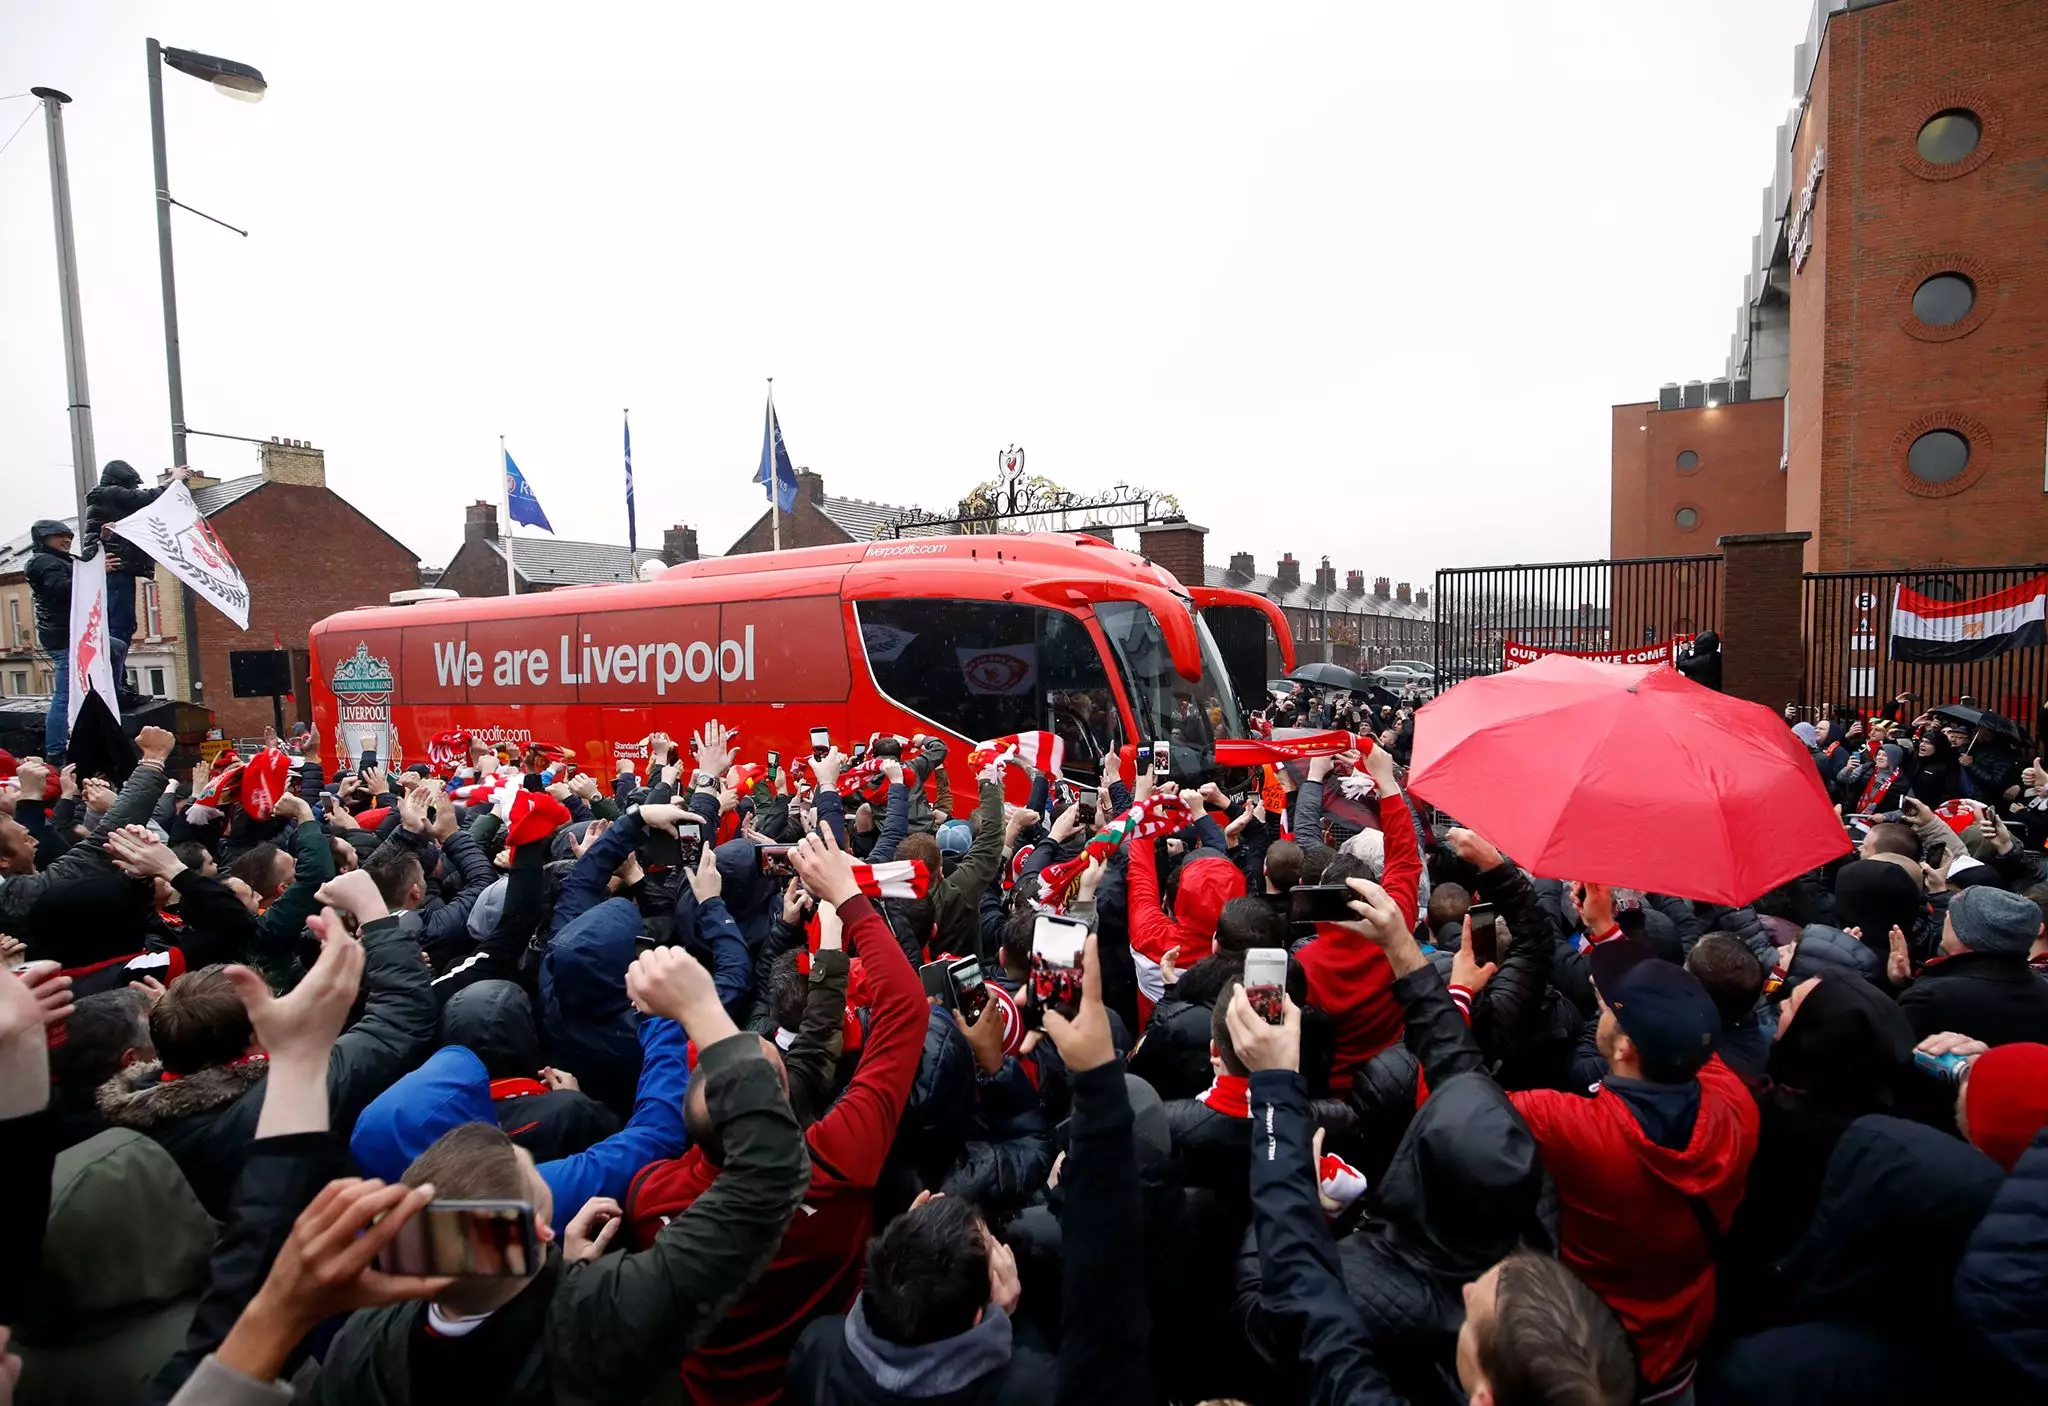 The Liverpool team coach arrives at Anfield. Image: PA